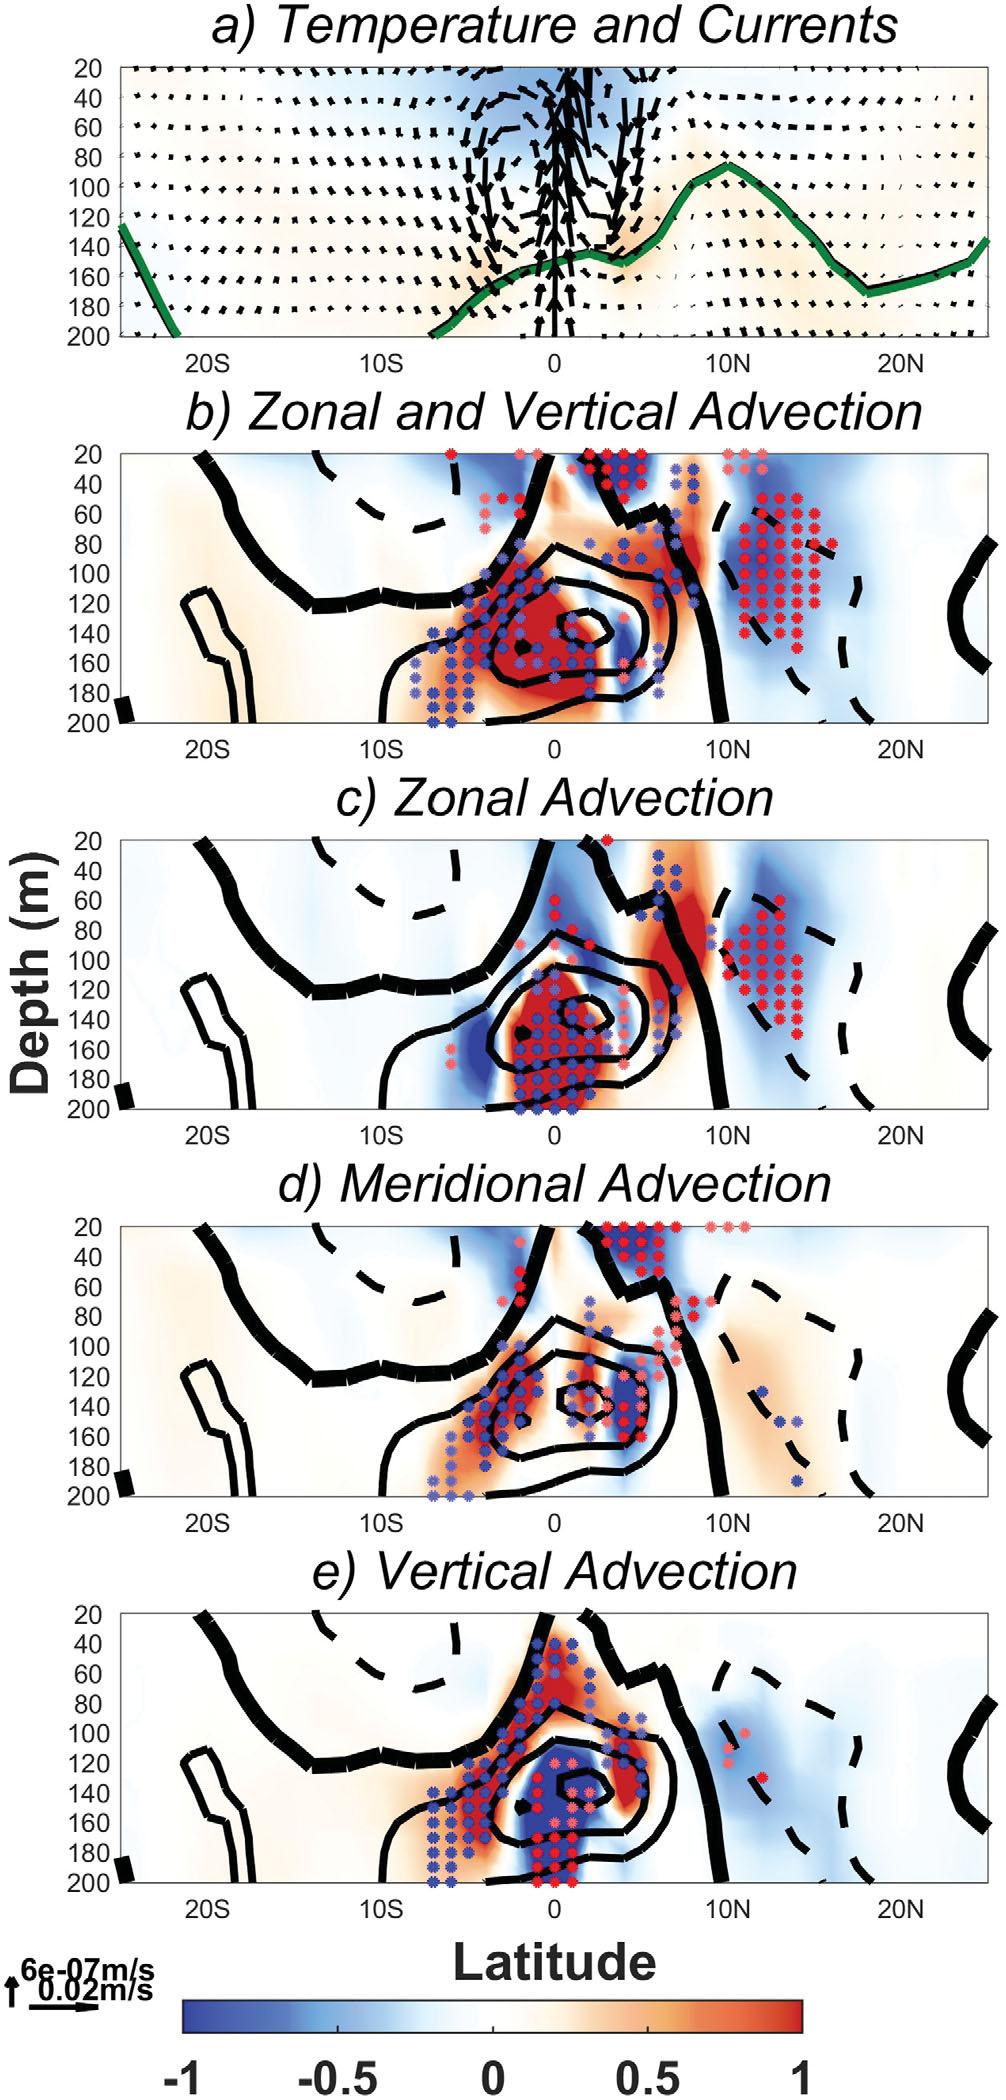 Figure 9. Same as Figure 8a, 8c, and 8f 8h, but for the meridional transect of temperature, meridional and vertical currents and heat advection in the 160 150W sector. 6.